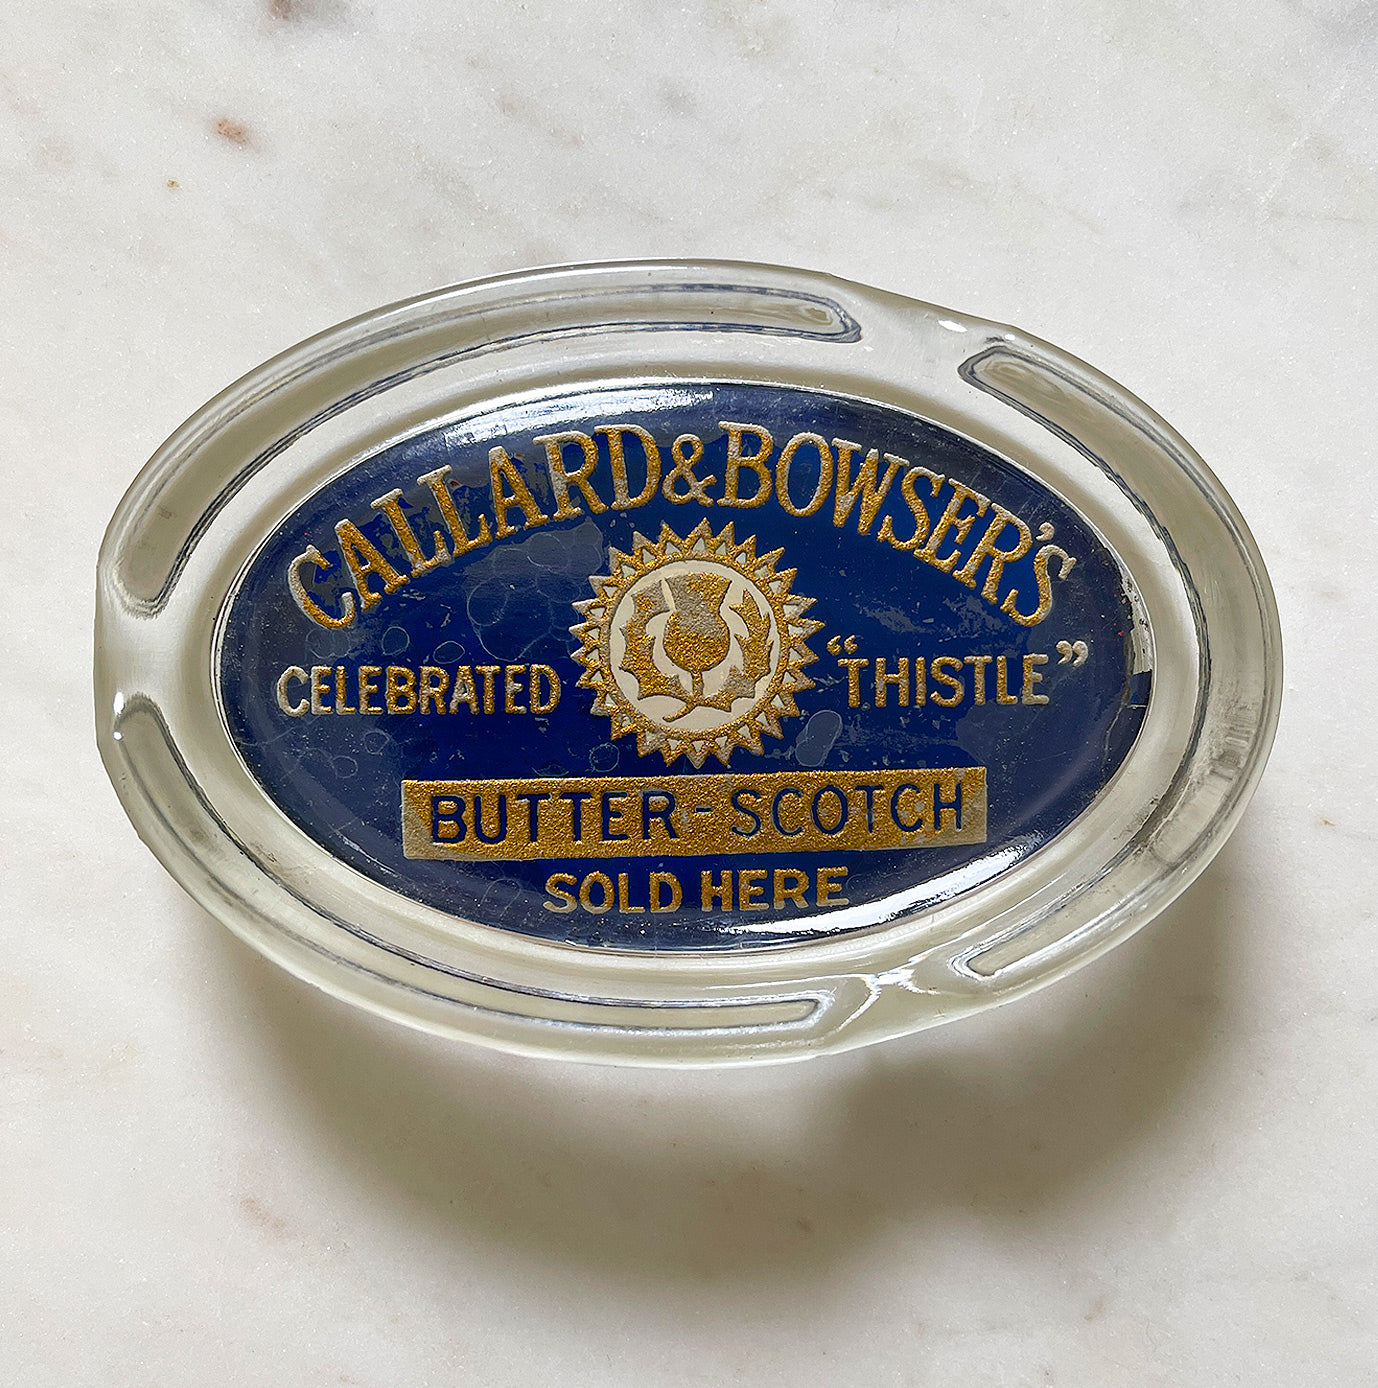 A Glass Callard & Bowser's Celebrated Thistle Butter Scotch Advertising Ashtray with nice gold and blue typography and thistle graphic - SHOP NOW - www.intovintage.co.uk